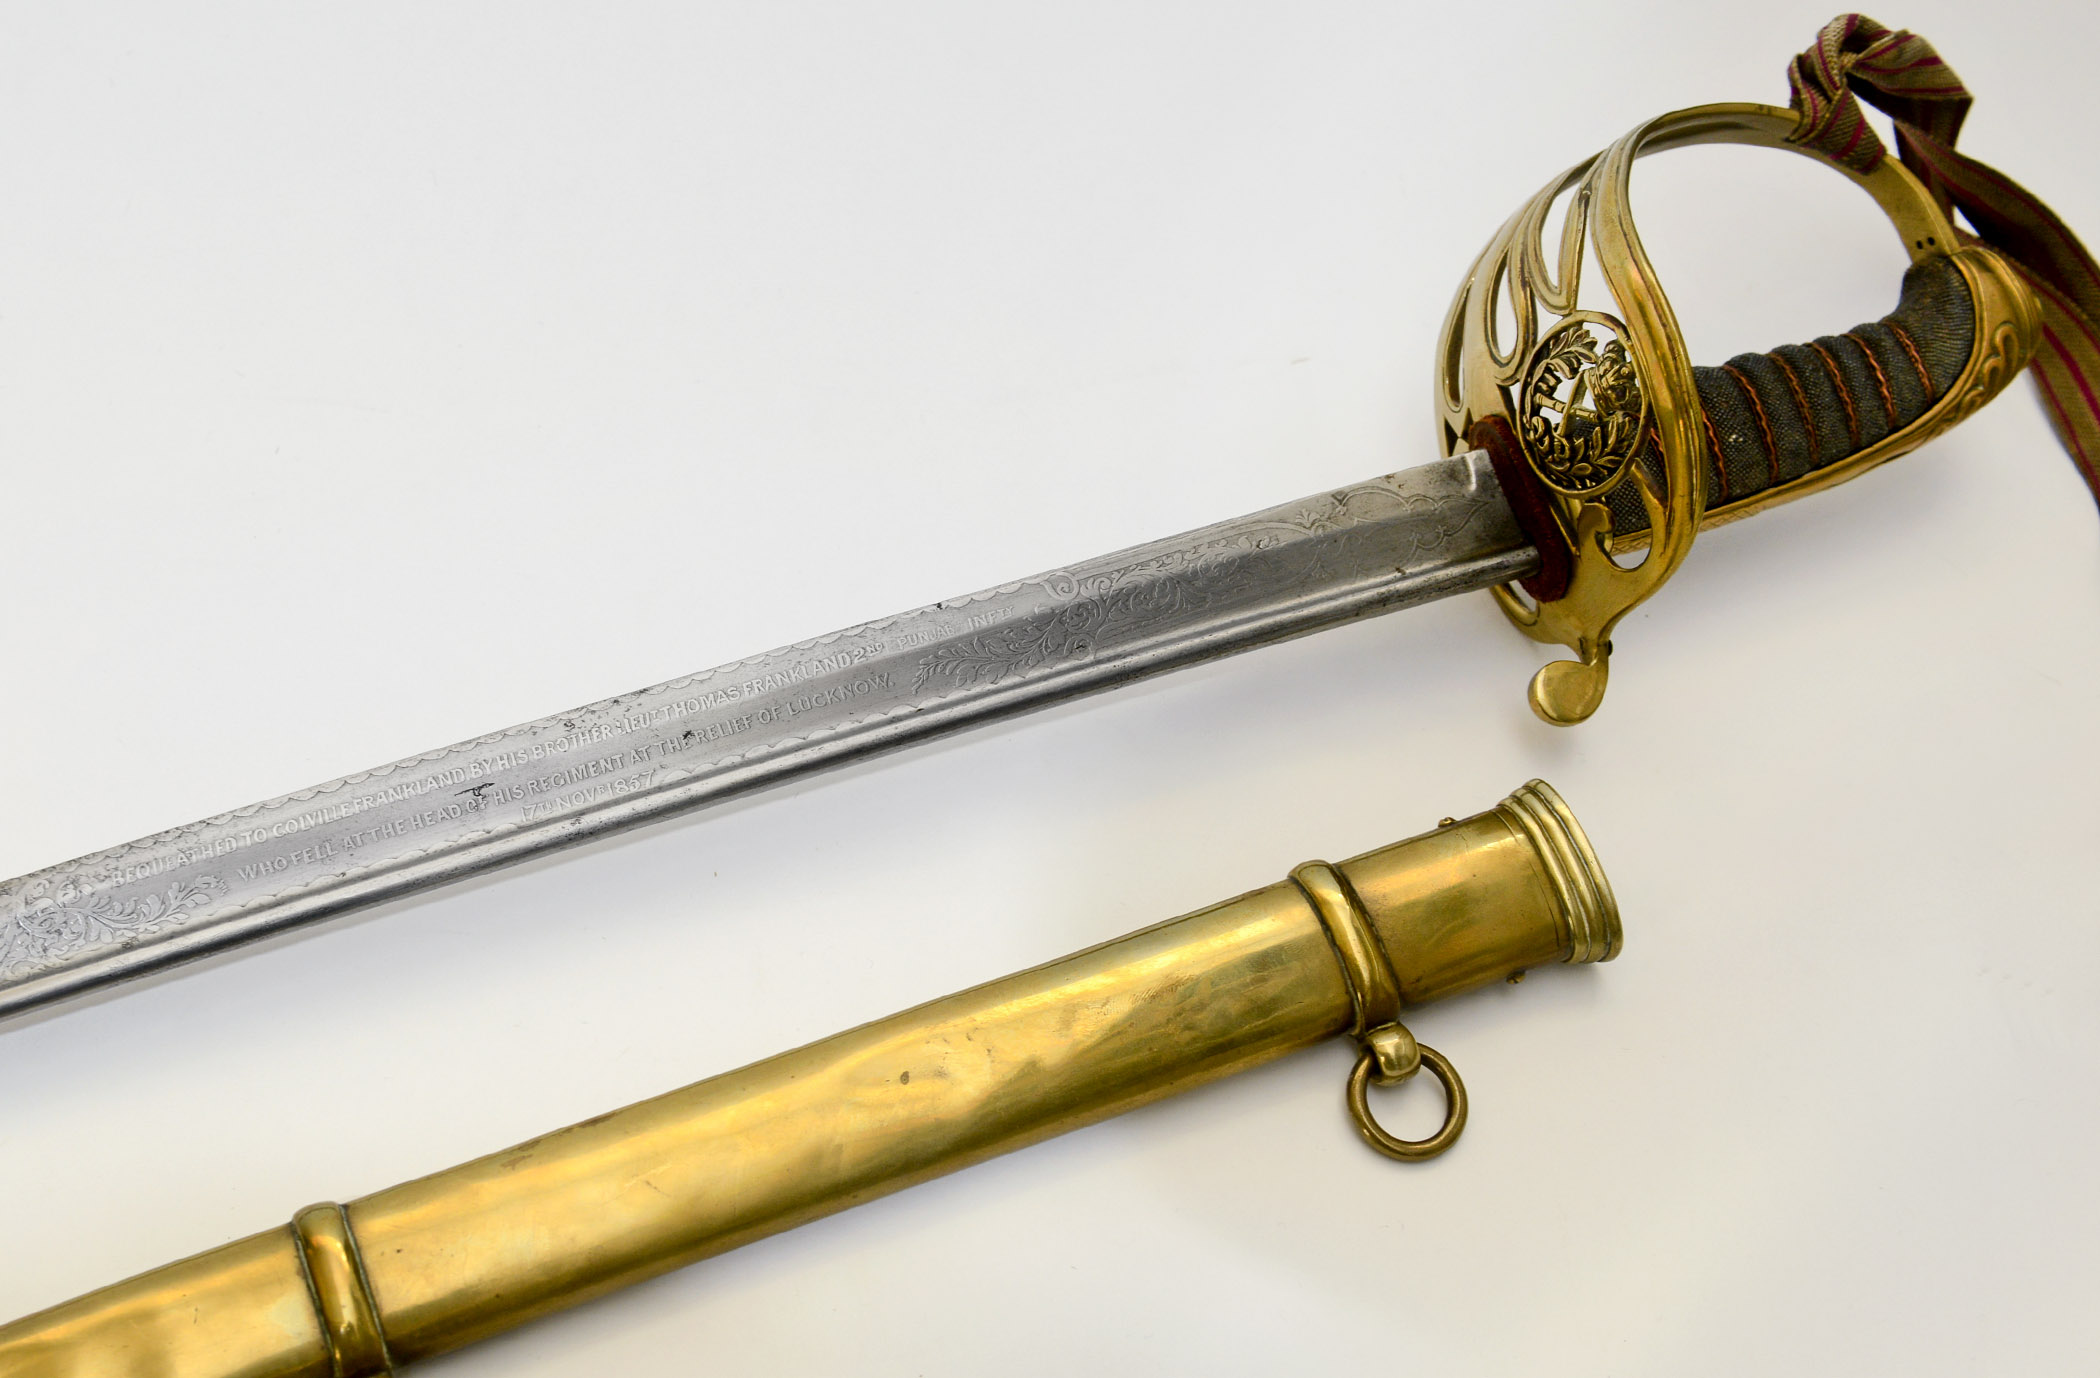 AN INDIAN MUTINY CASUALTY OFFICERS SWORD. The General Officers sword of Lieutenant Thomas